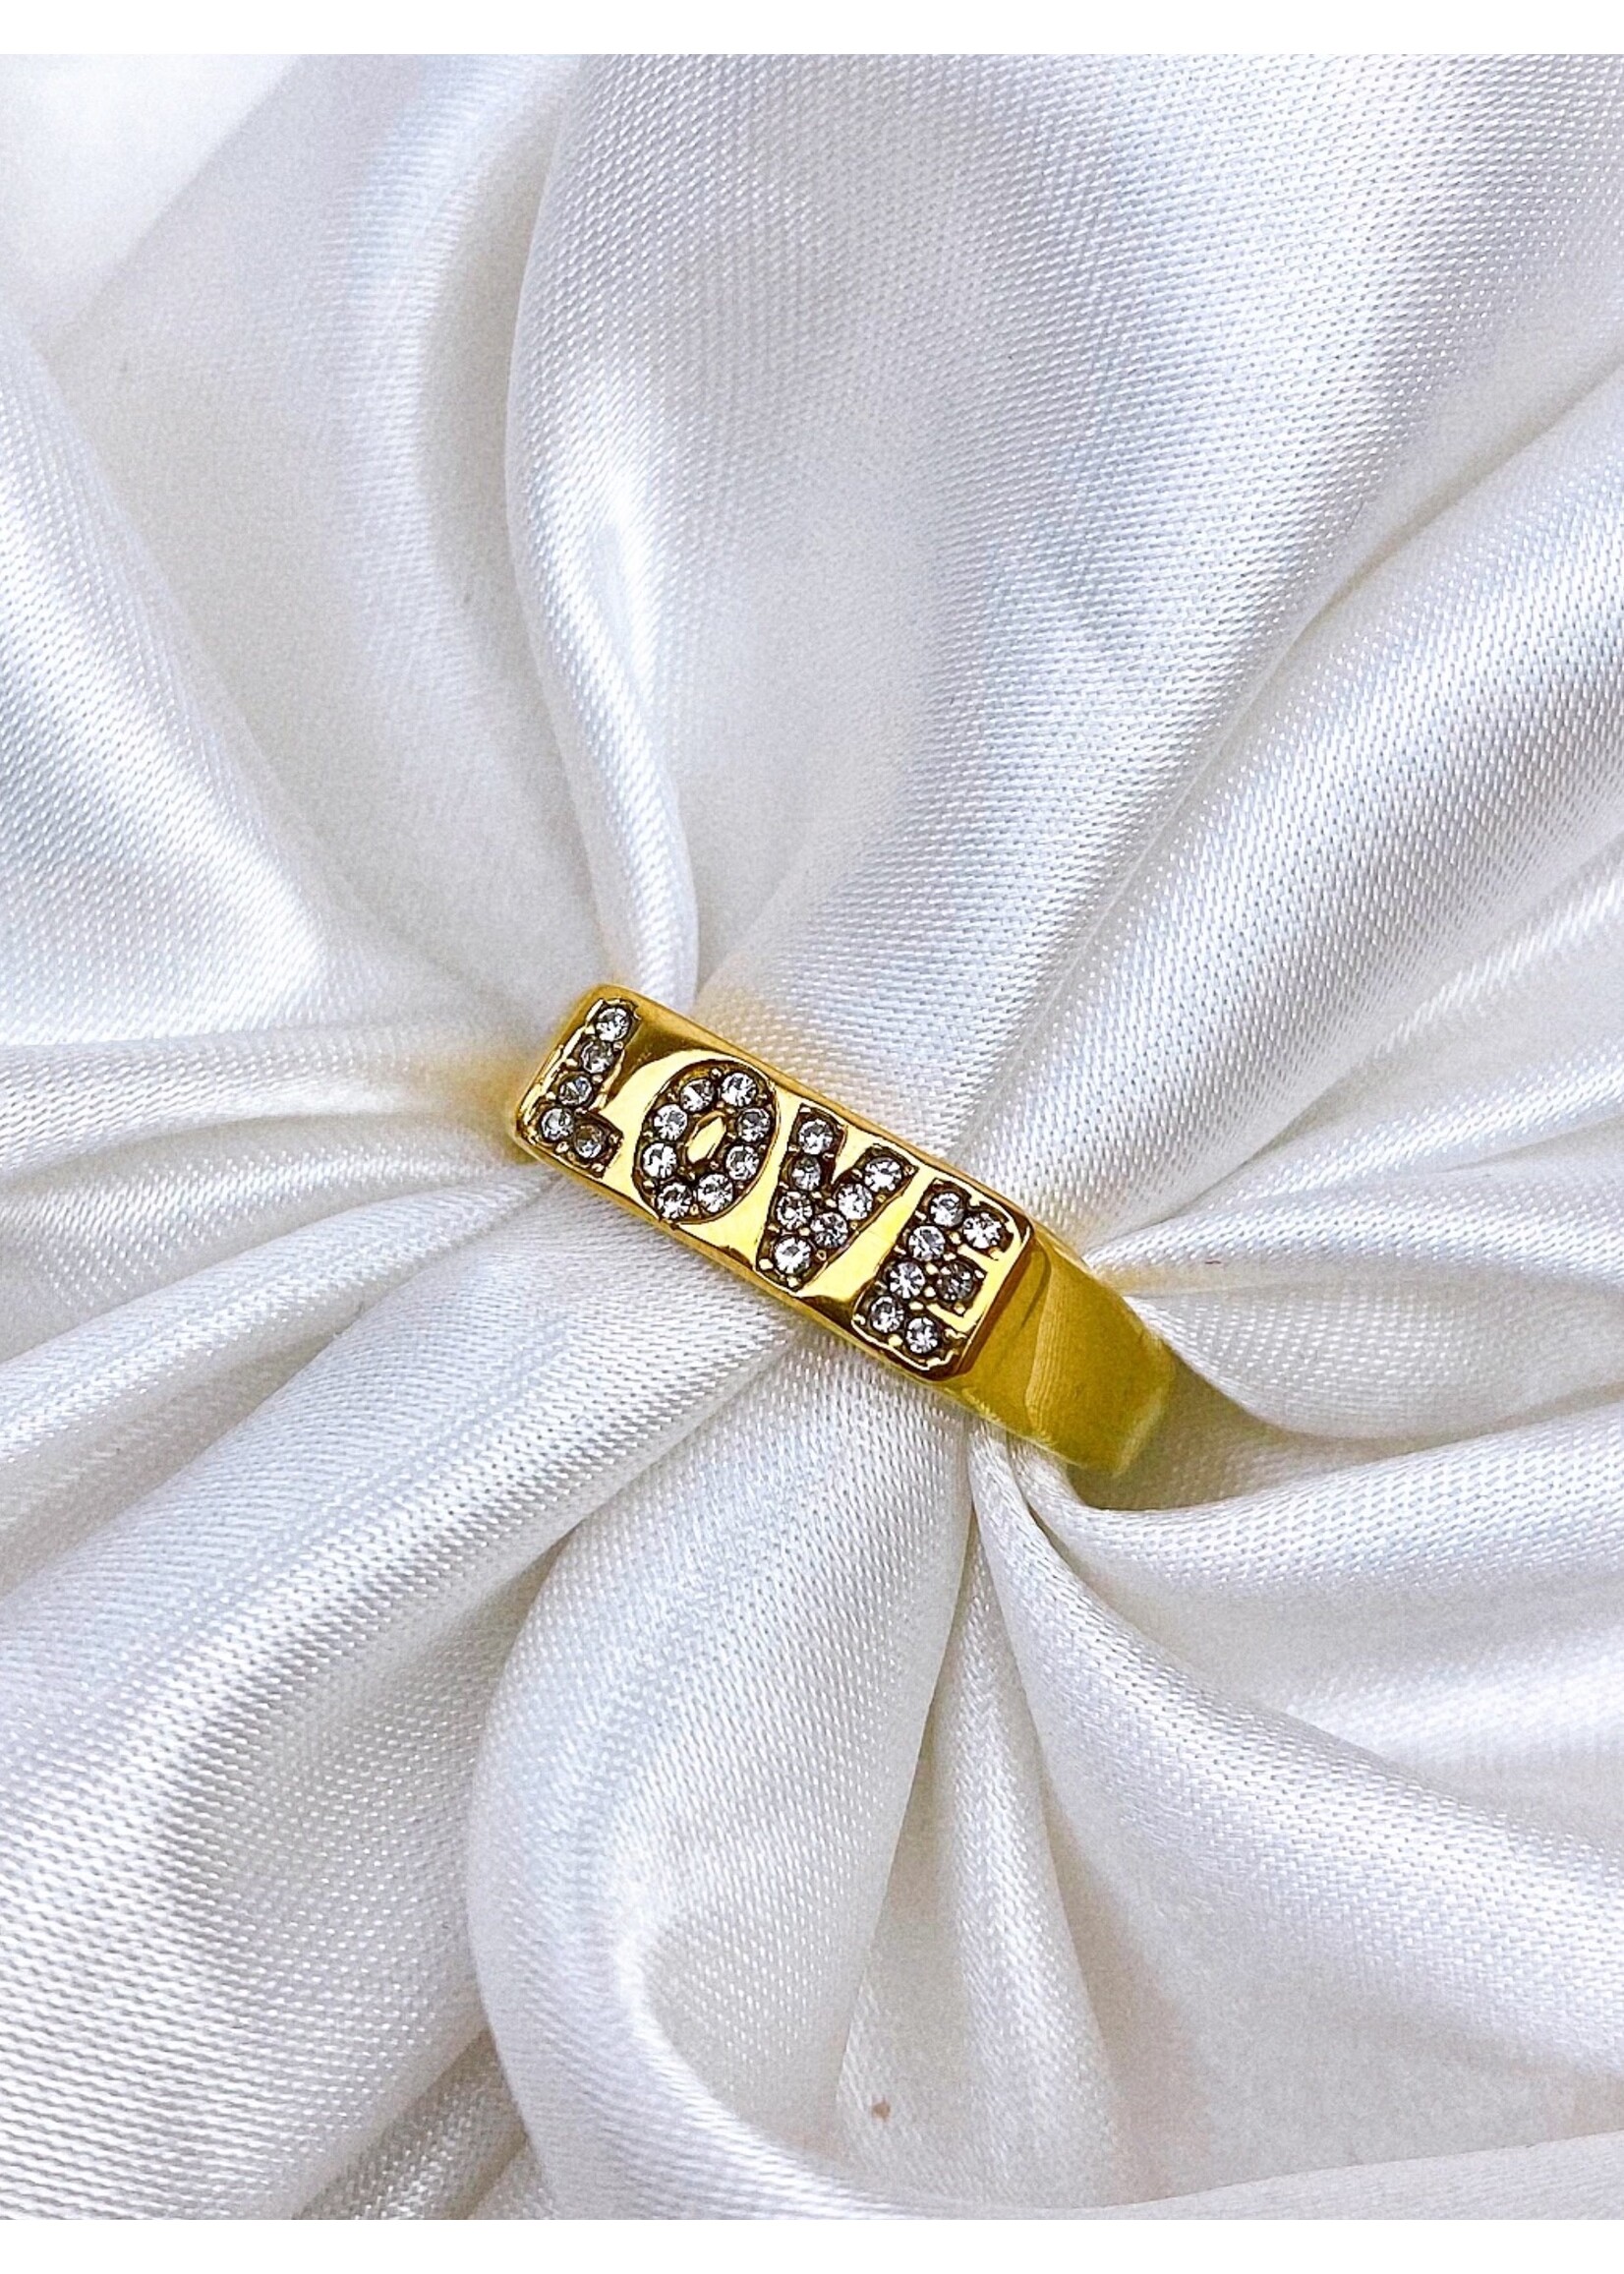 YOU ARE SPECIAL "Diamond Love" Gold Ring